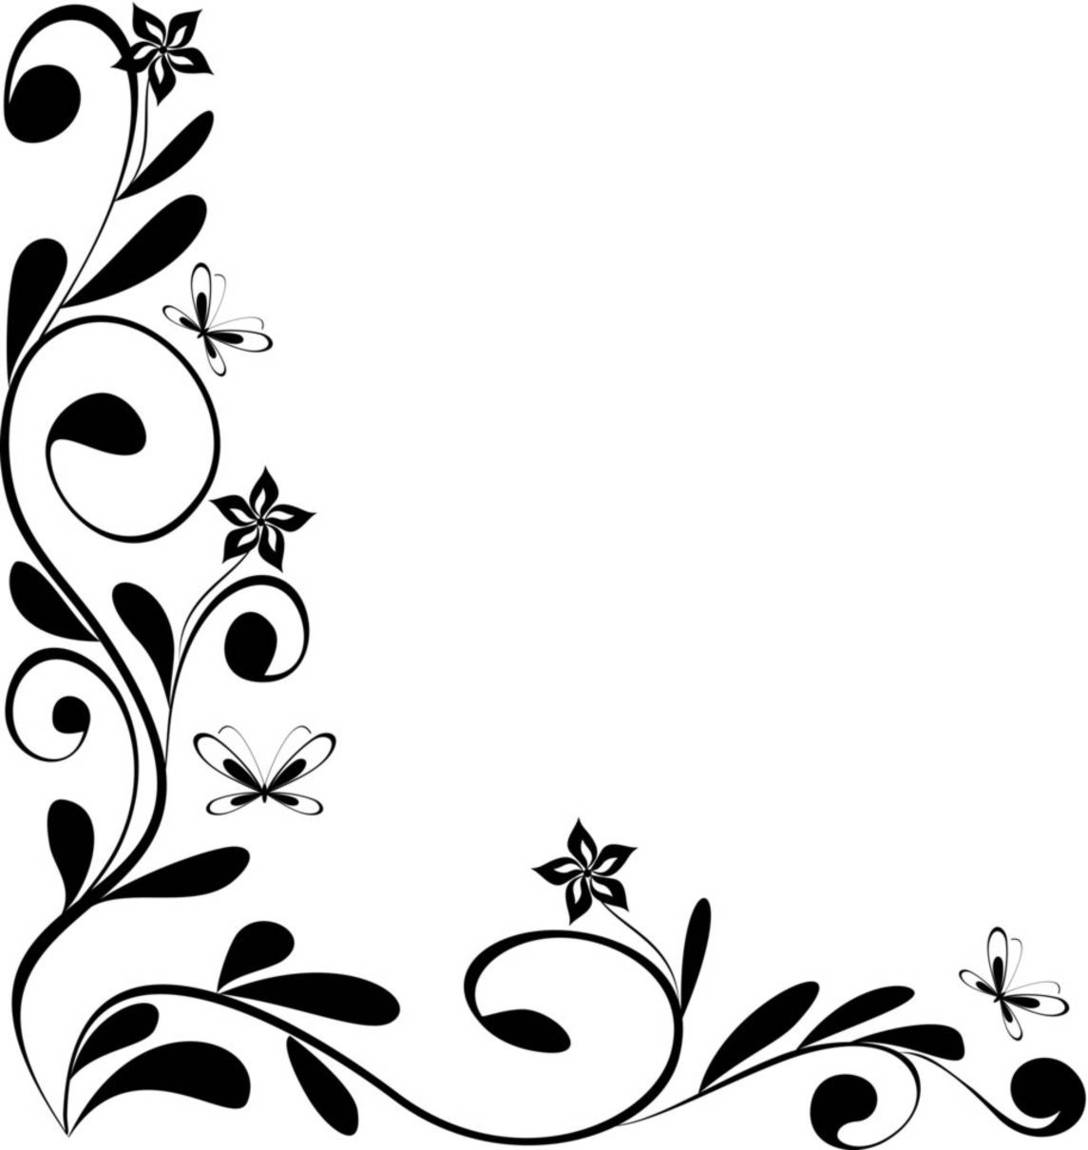 Simple Corner Page Borders Clipart - Free to use Clip Art Resource